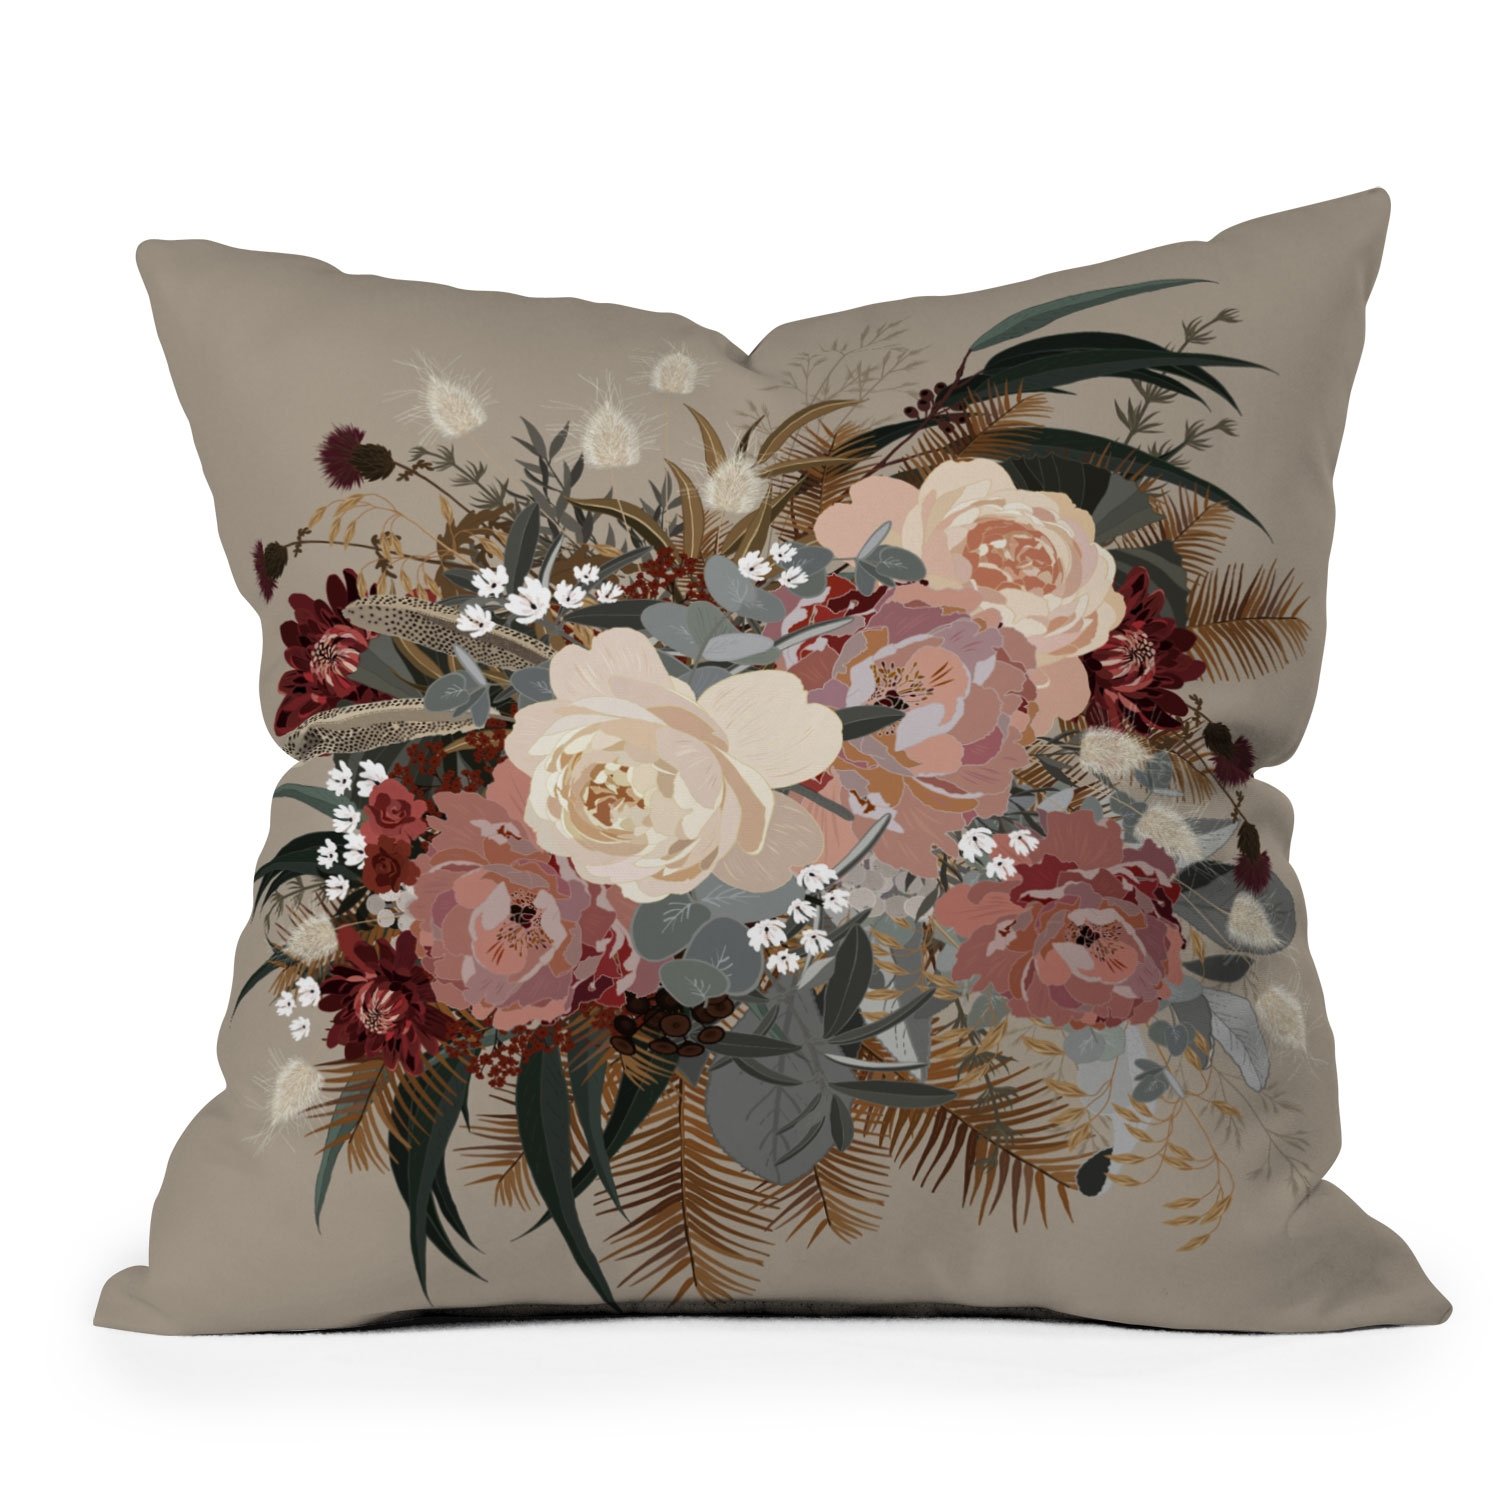 Brielle Coffee by Iveta Abolina - Outdoor Throw Pillow 26" x 26" - Image 3